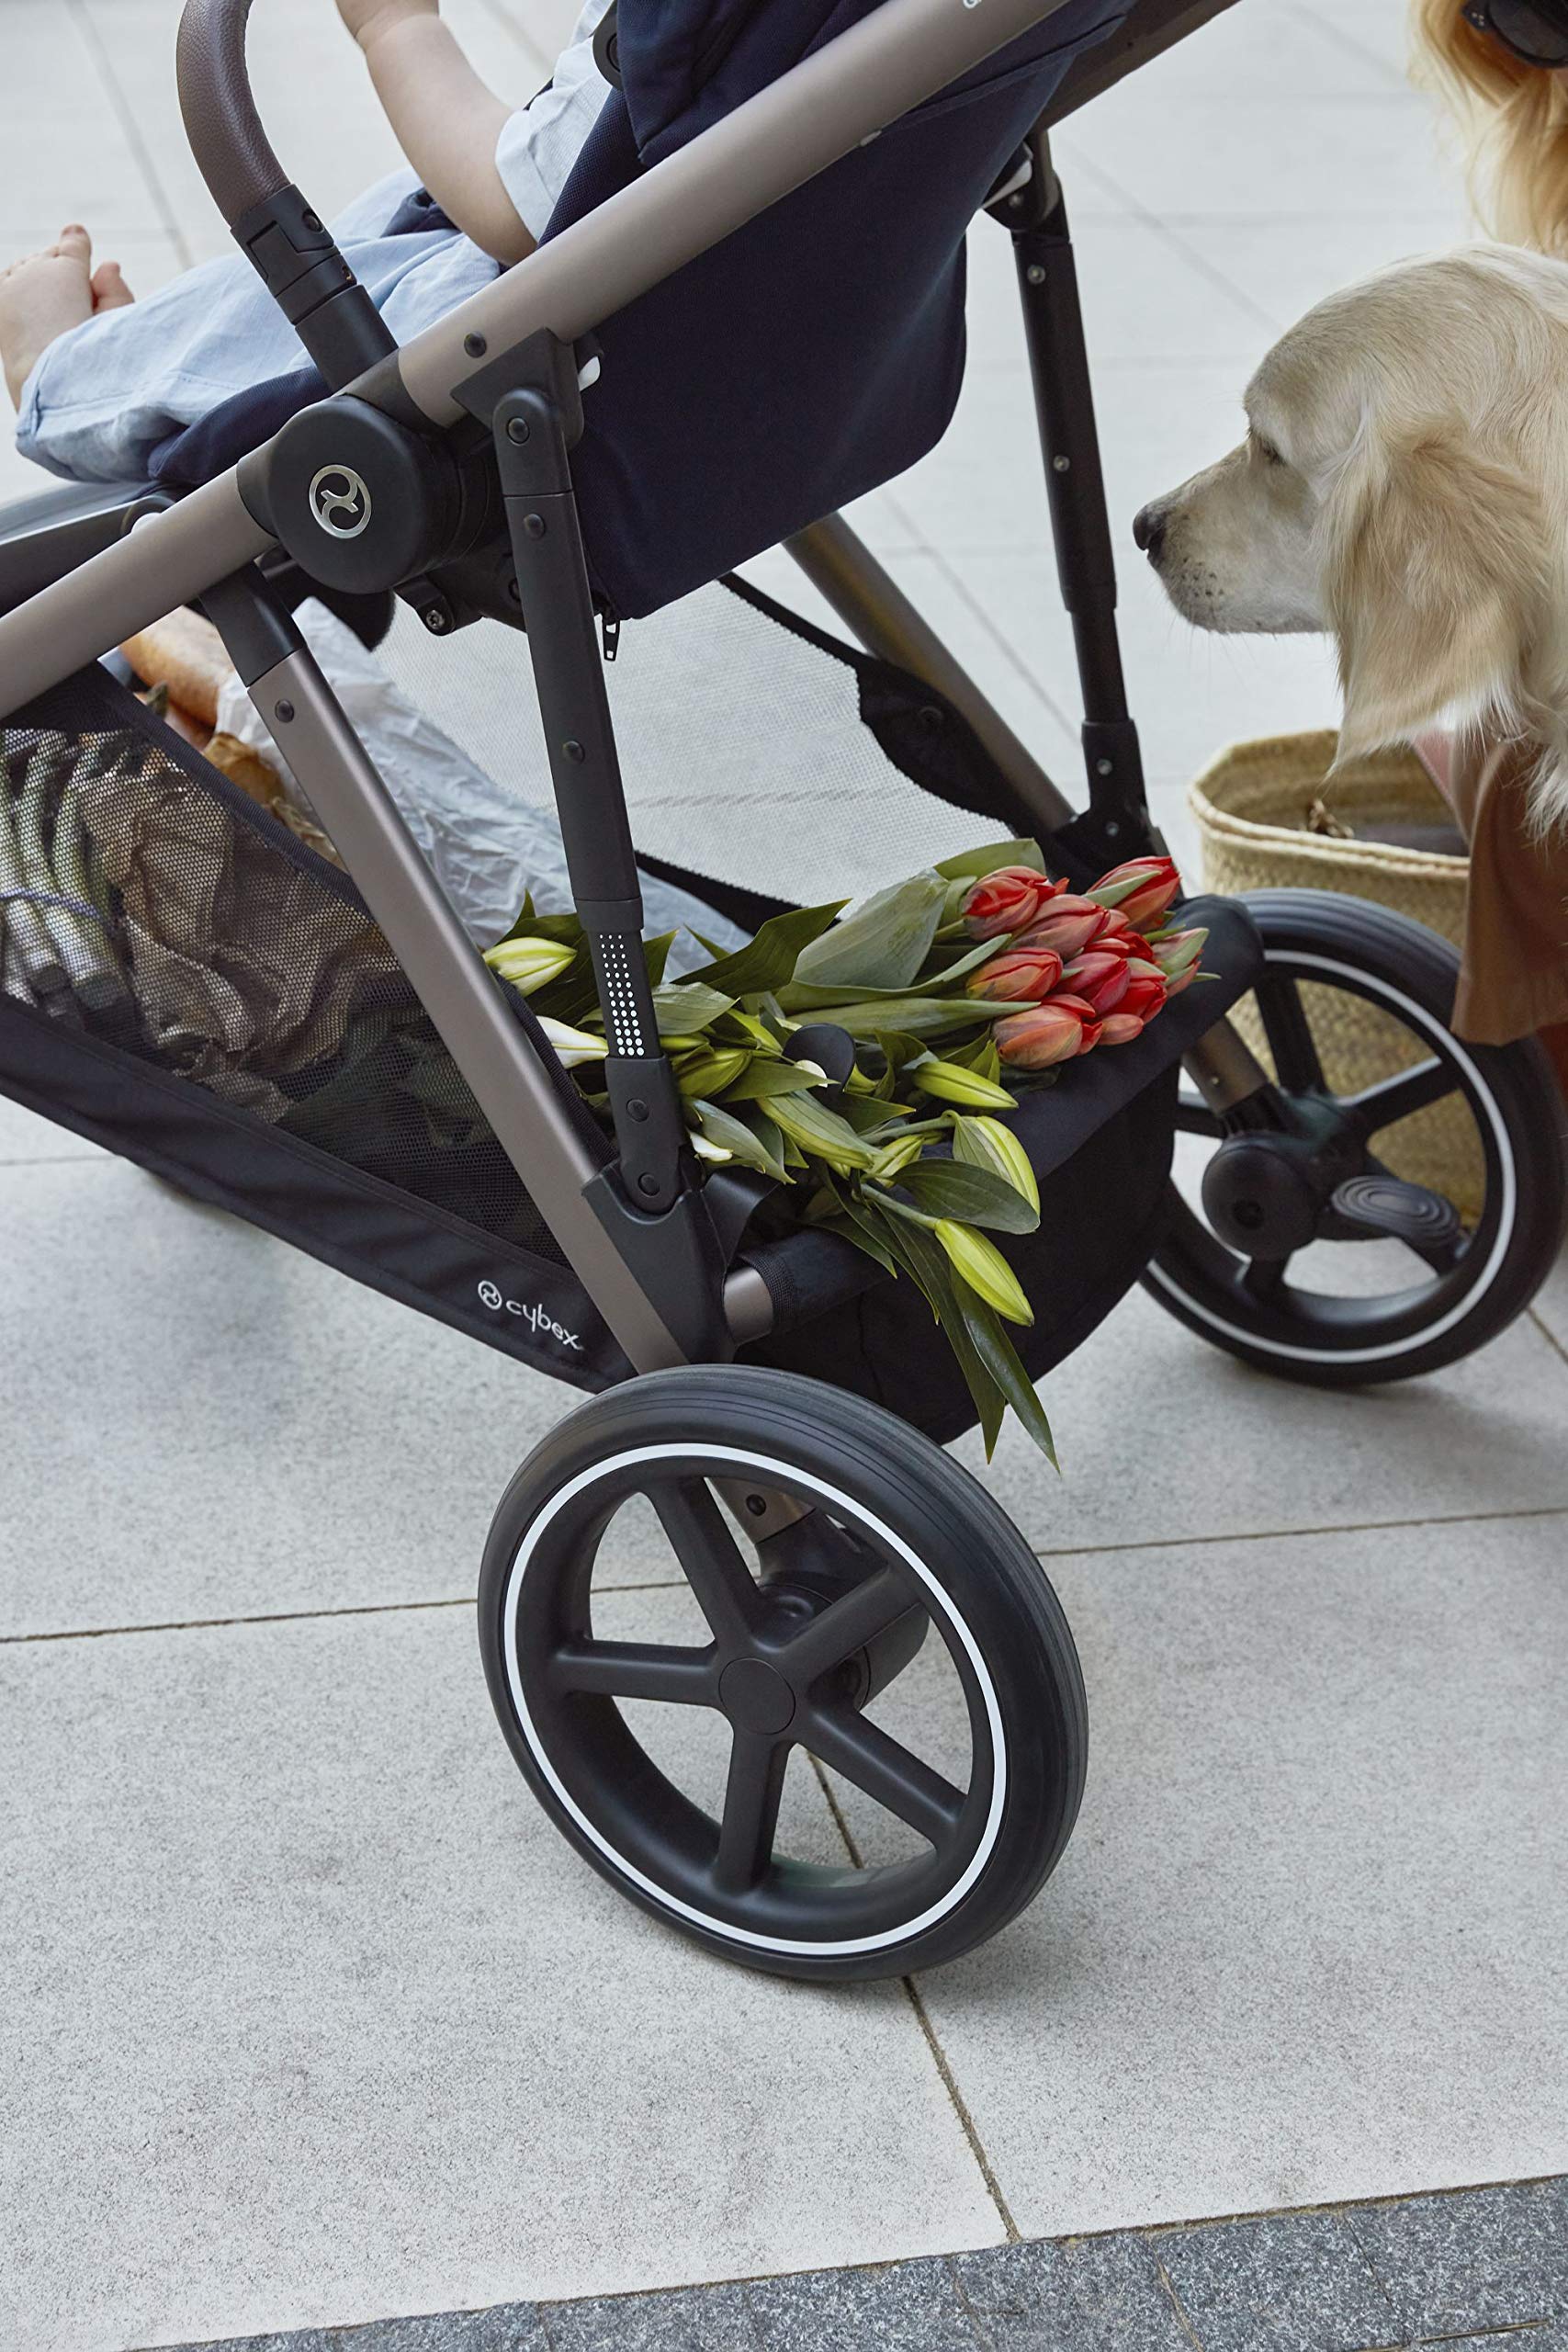 Gazelle S Stroller Modular Double Stroller for Infant and Toddler Includes Detachable Shopping Basket Over 20+ Configurations Folds Flat for Easy Storage